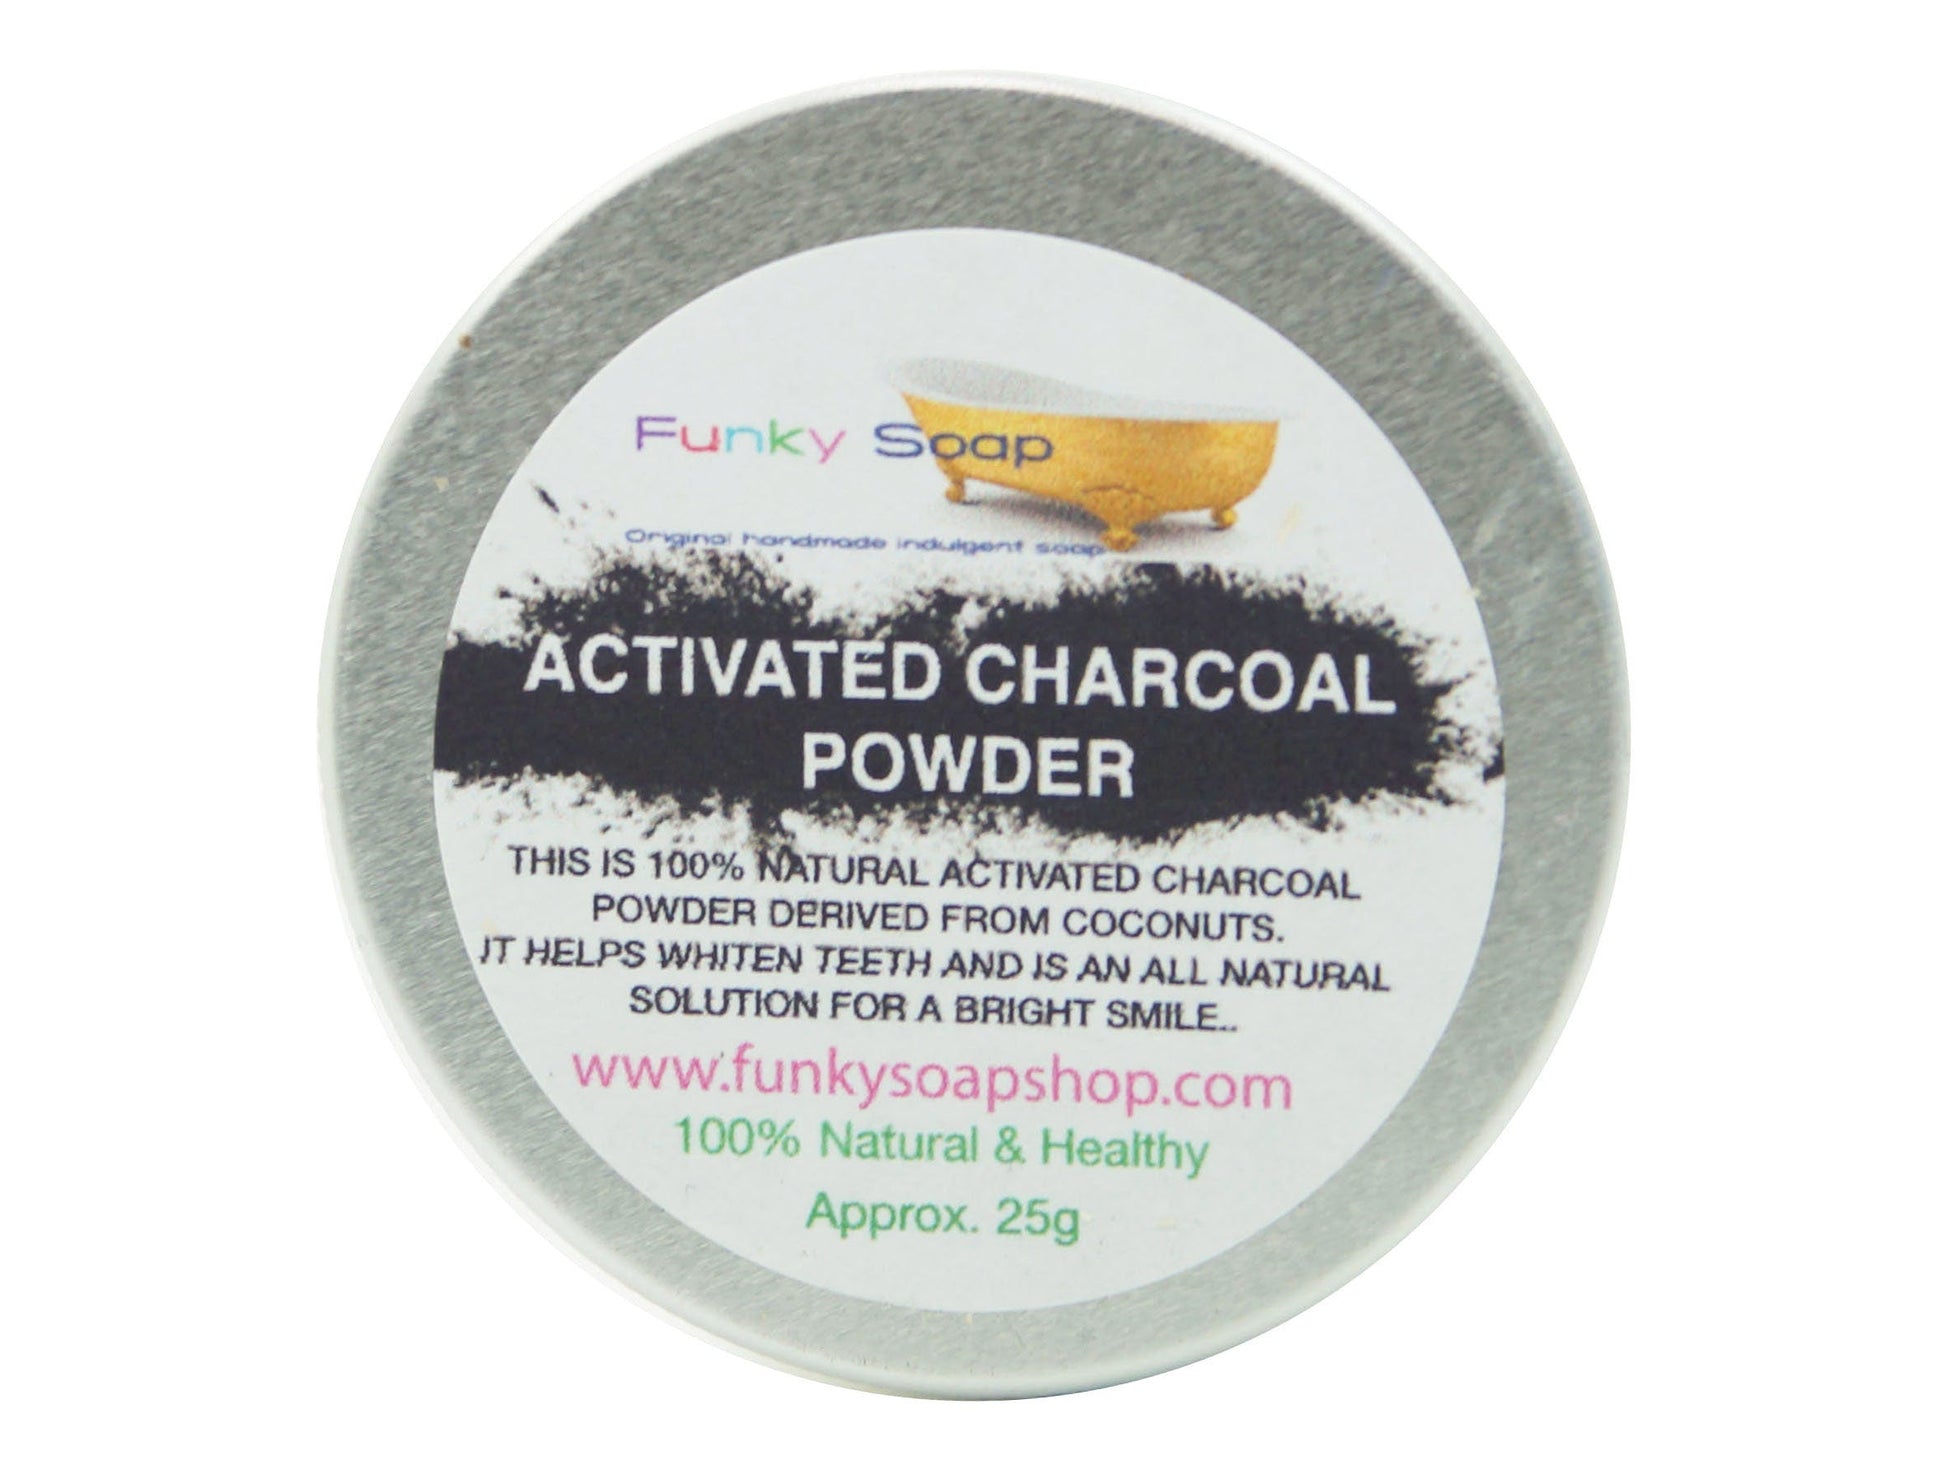 Activated Charcoal Powder, 25g - Funky Soap Shop